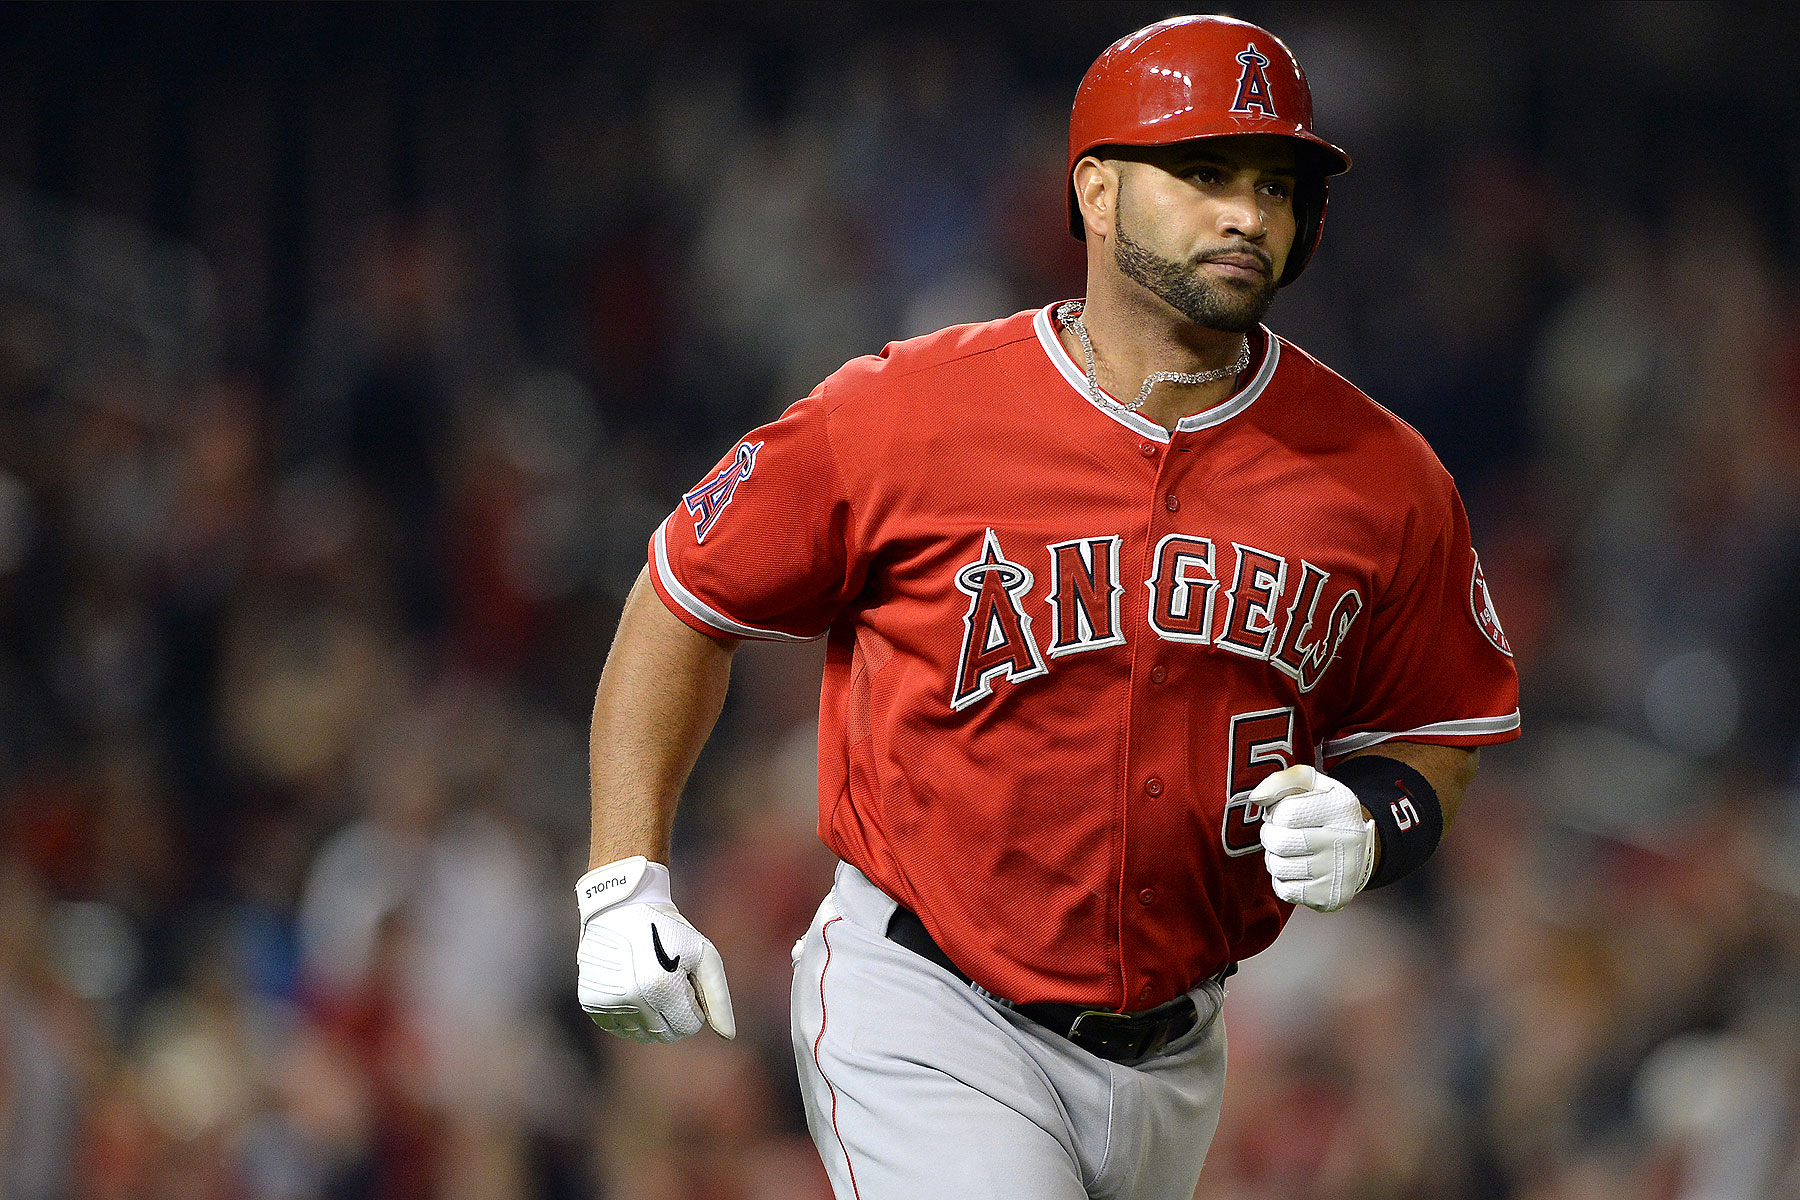 MLB: April ends with no homers for Pujols